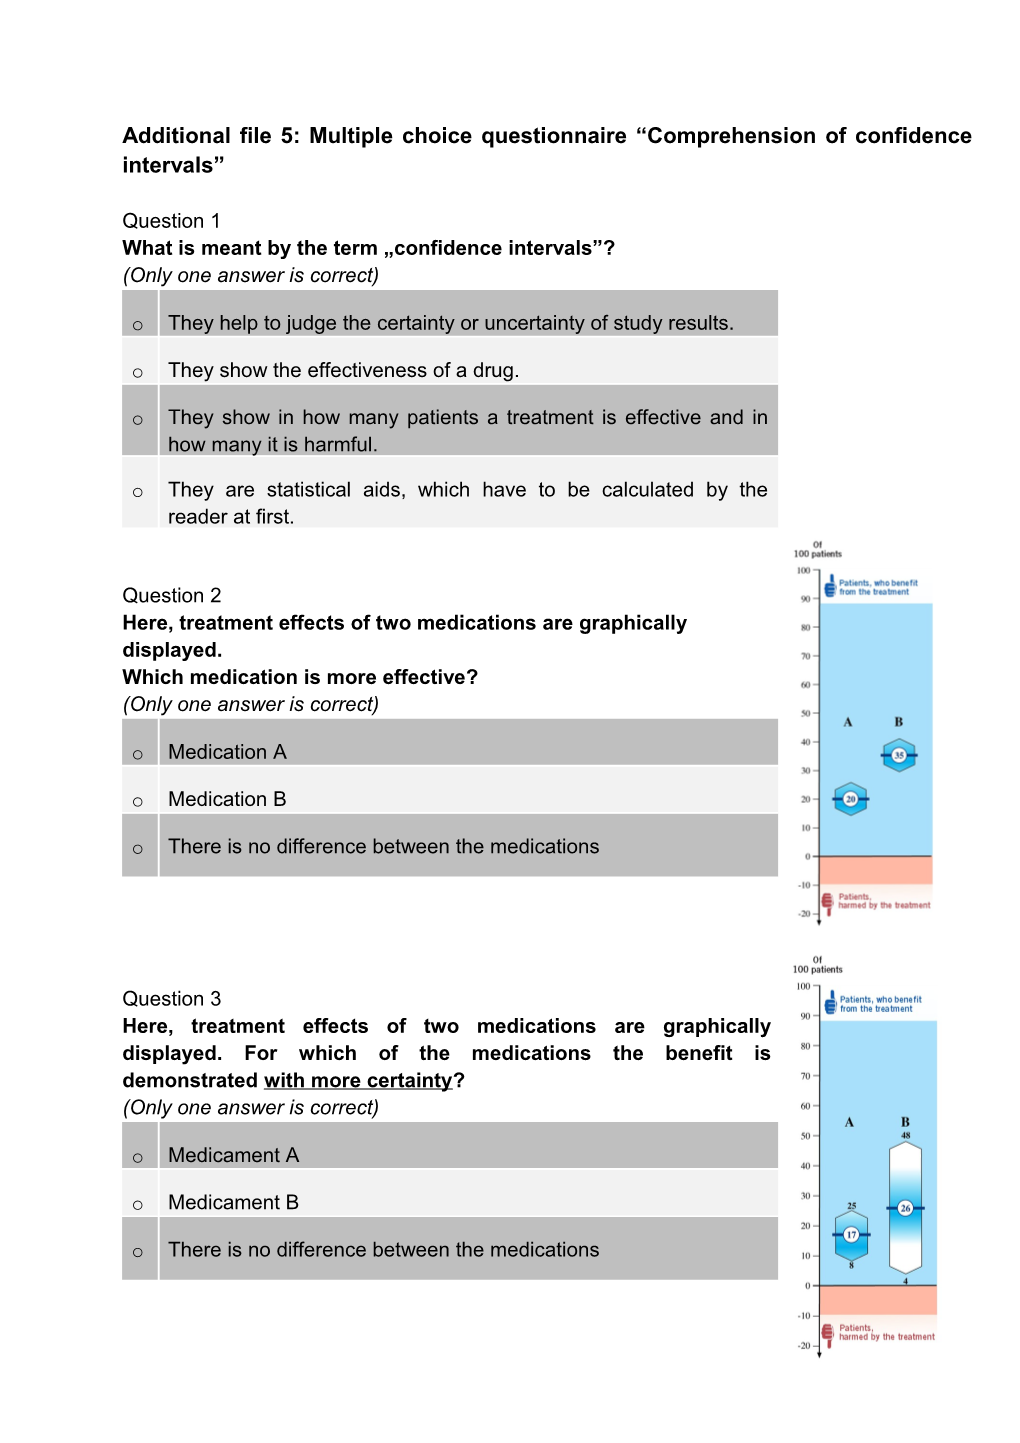 Additional File 5: Multiple Choice Questionnaire Comprehension of Confidence Intervals